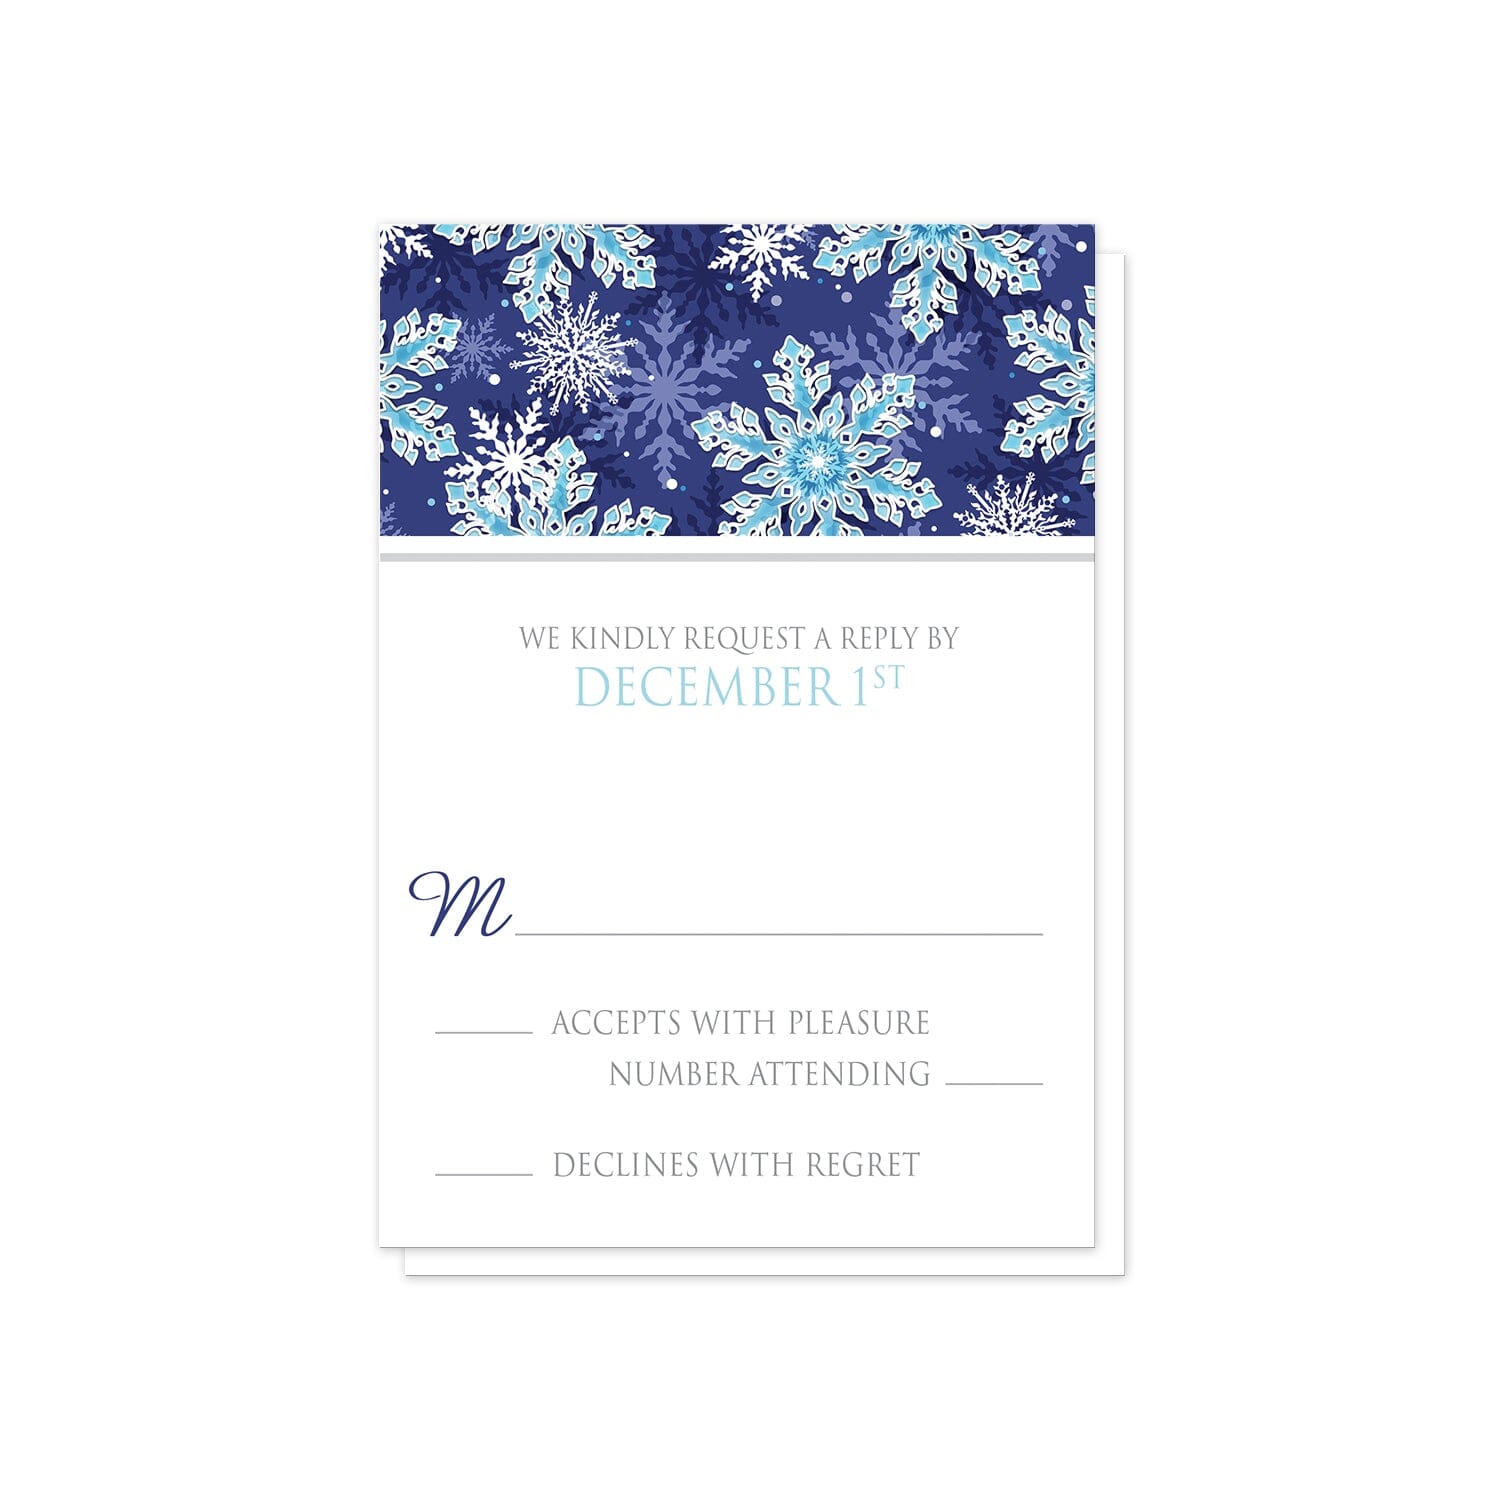 Navy Blue Aqua Snowflake RSVP Cards at Artistically Invited. Pretty navy blue aqua snowflake wedding invitations with a pattern of white and aqua blue snowflakes over a navy blue background. Your personalized marriage celebration details are custom printed in navy blue, aqua blue and gray in a white frame area in the center over the ornate navy blue snowflakes pattern.